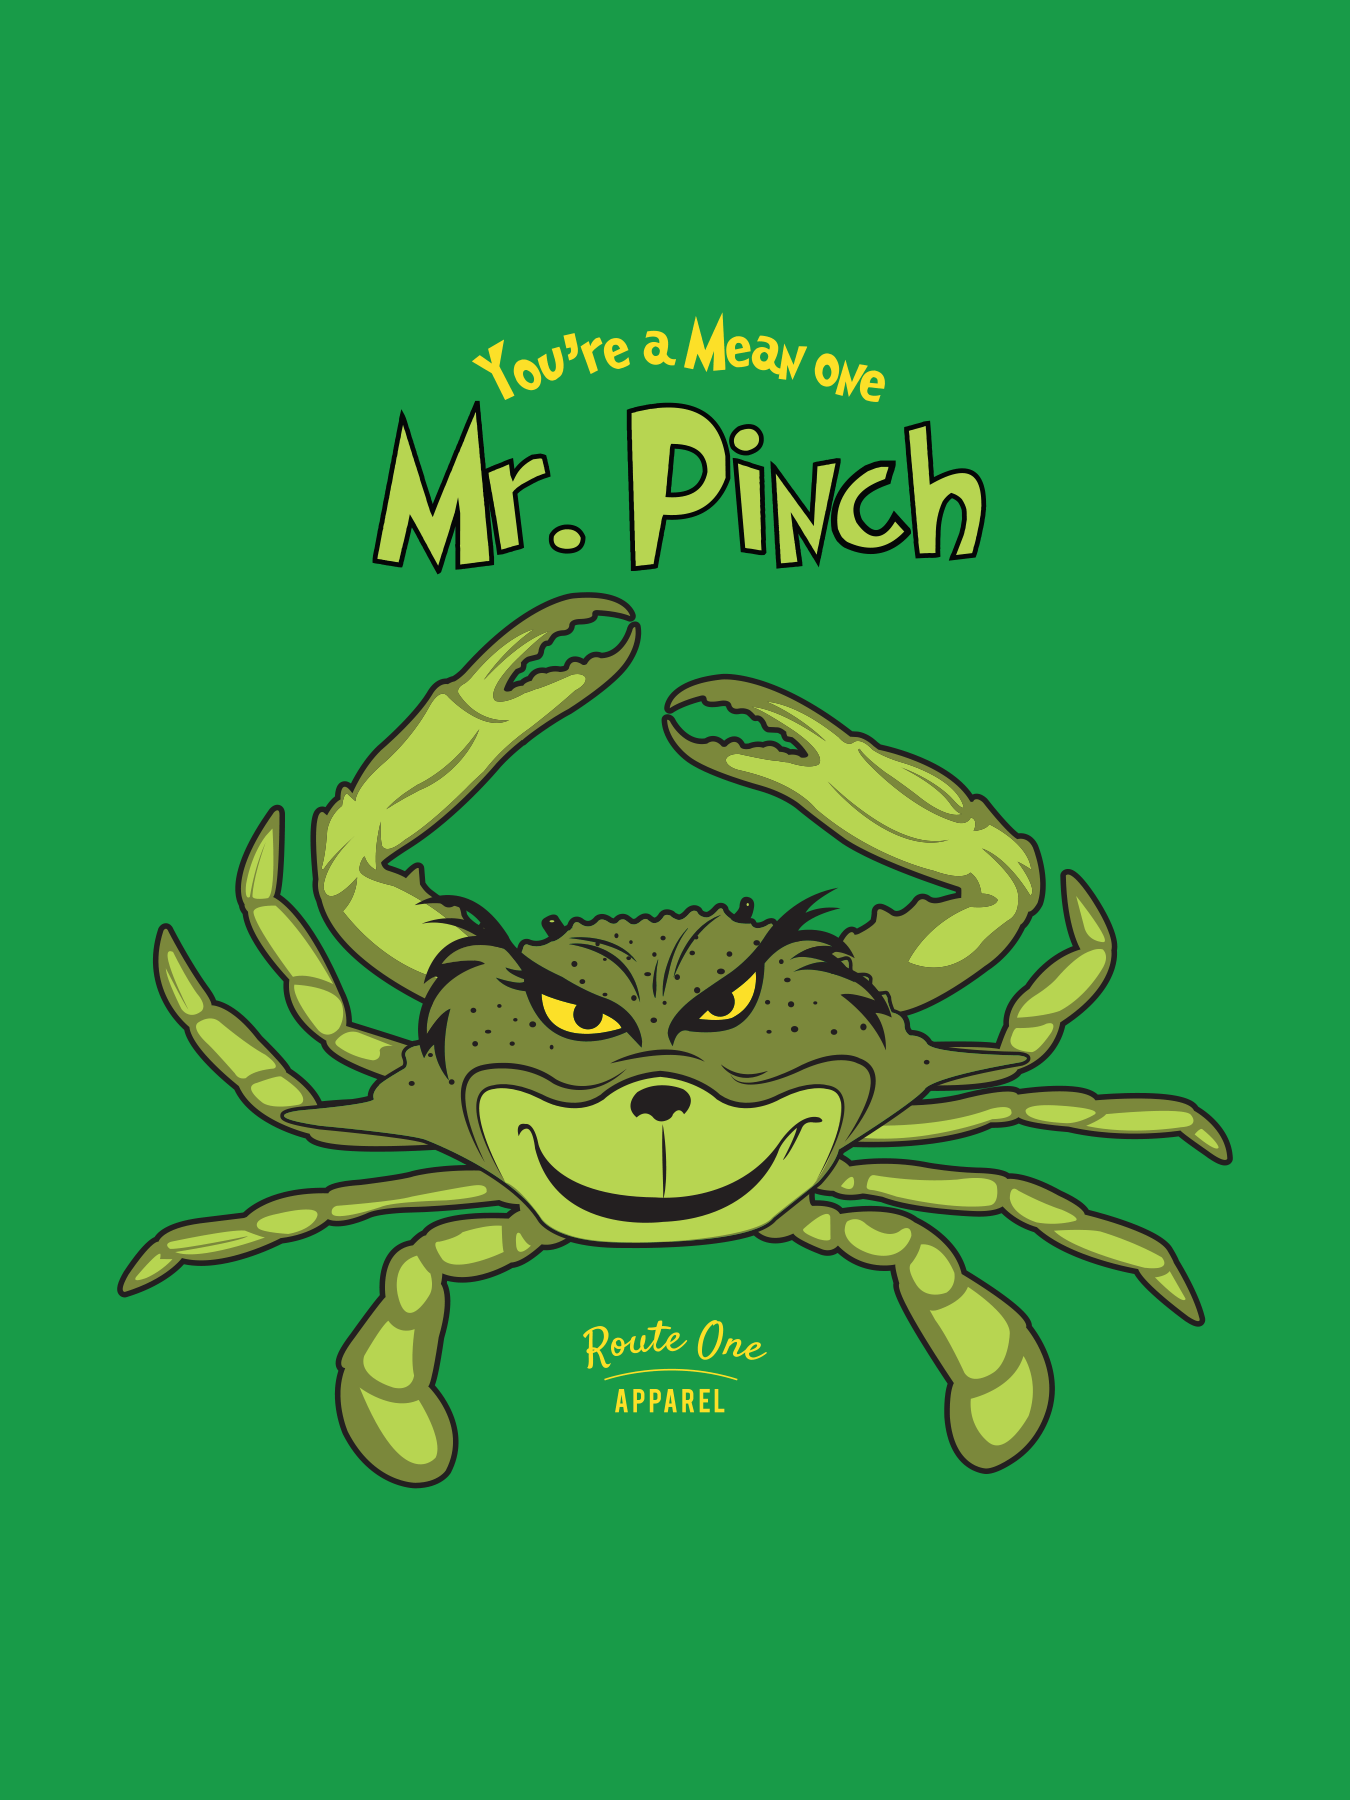 Mr. Pinch / Christmas Card - Route One Apparel